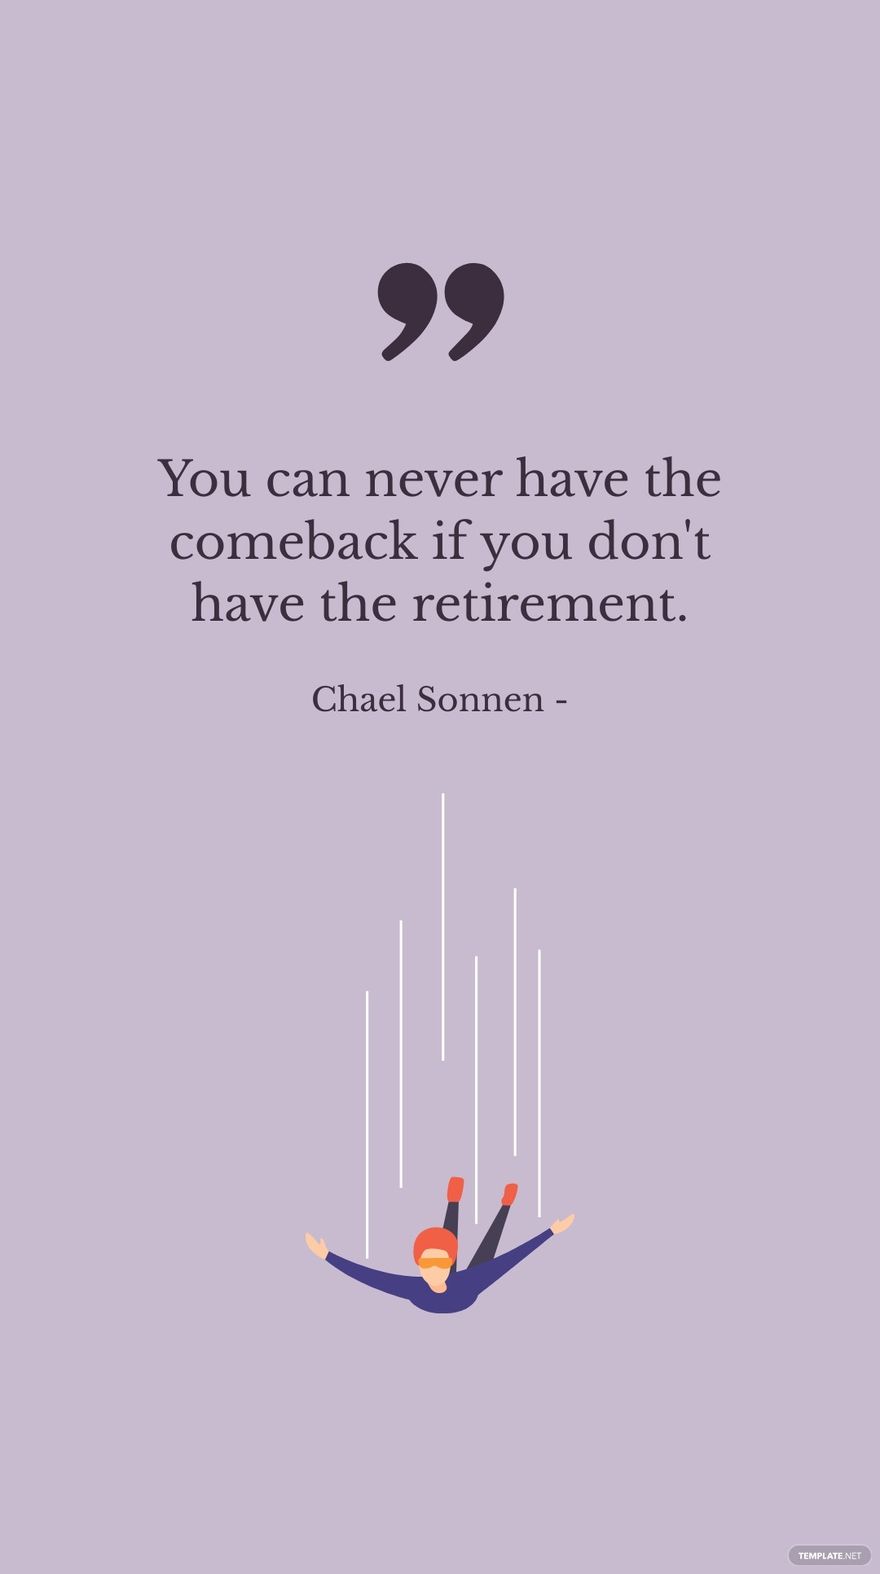 Free Chael Sonnen - You can never have the comeback if you don't have the retirement. in JPG